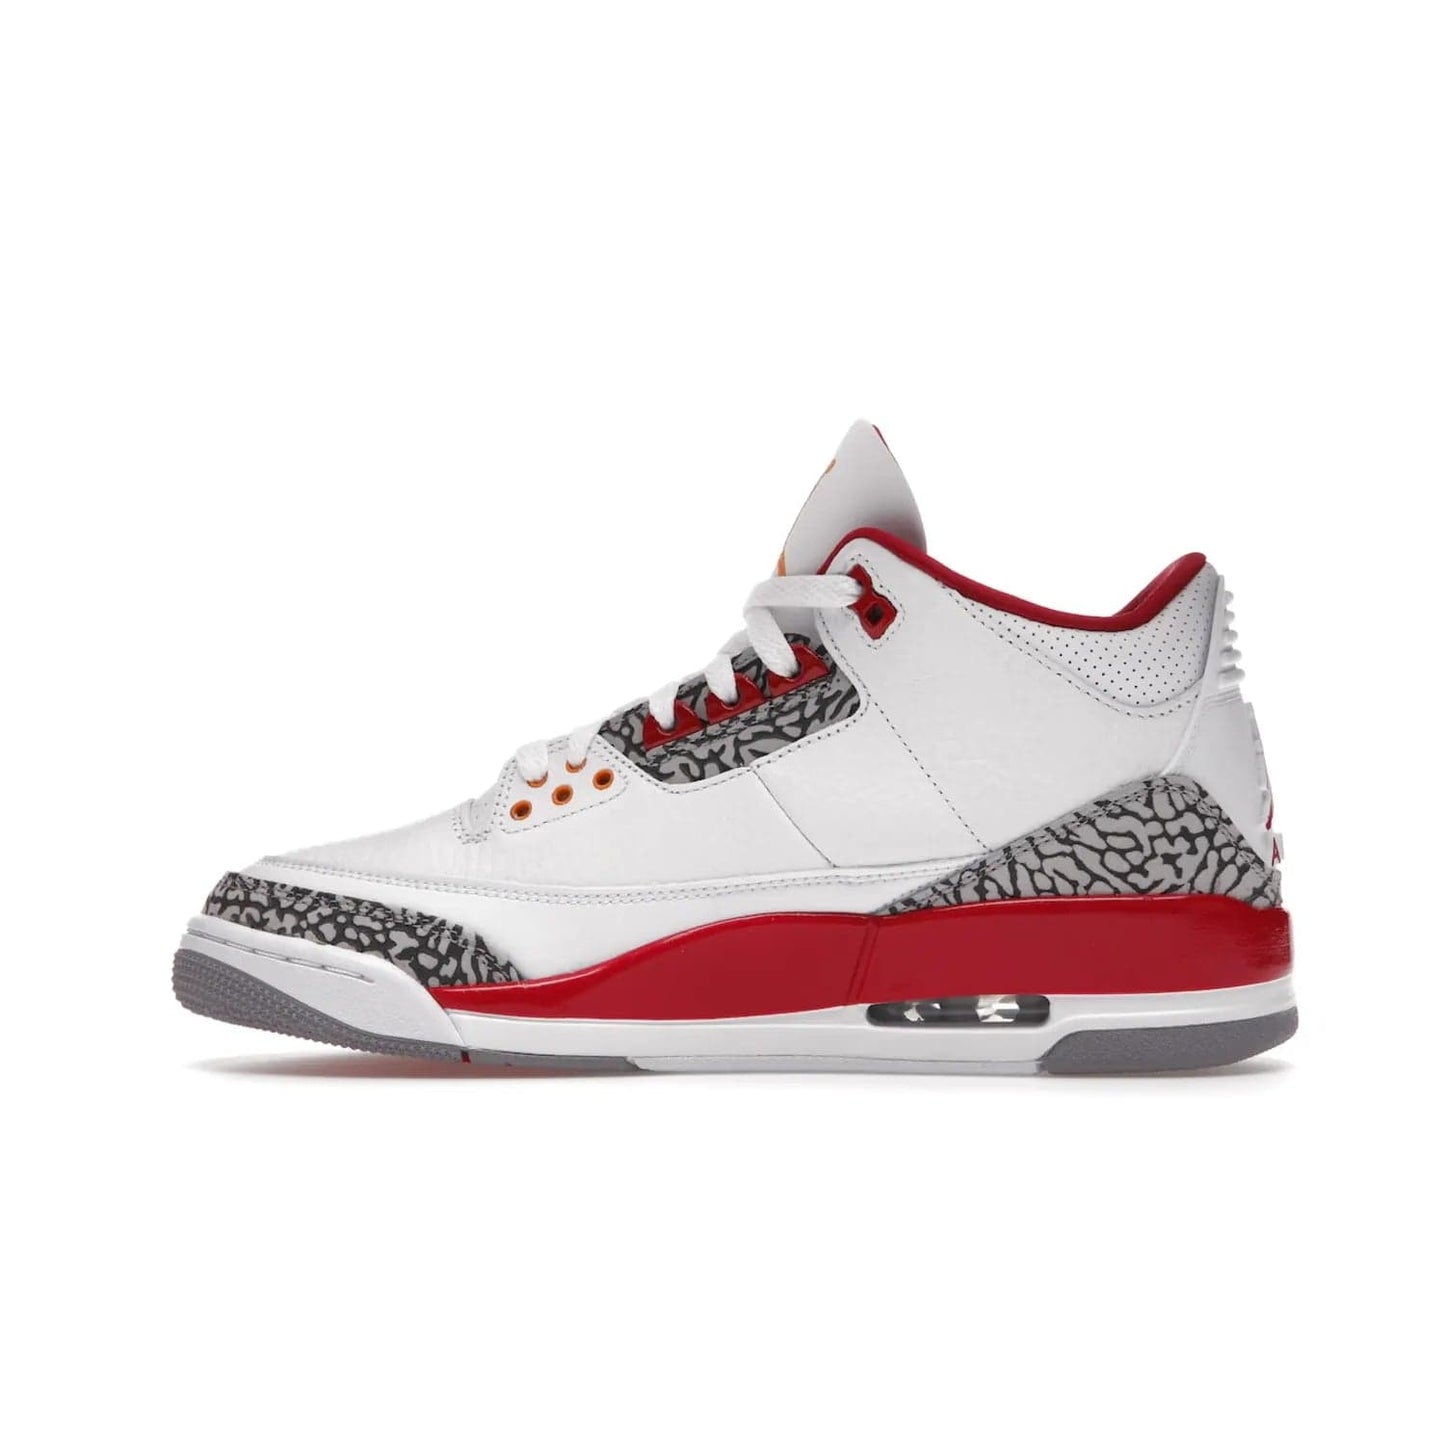 Jordan 3 Retro Cardinal Red - Image 20 - Only at www.BallersClubKickz.com - Air Jordan 3 Retro Cardinal Red combines classic style and modern appeal - white tumbled leather, signature Elephant Print overlays, cardinal red midsoles, Jumpman logo embroidery. Available Feb 2022.